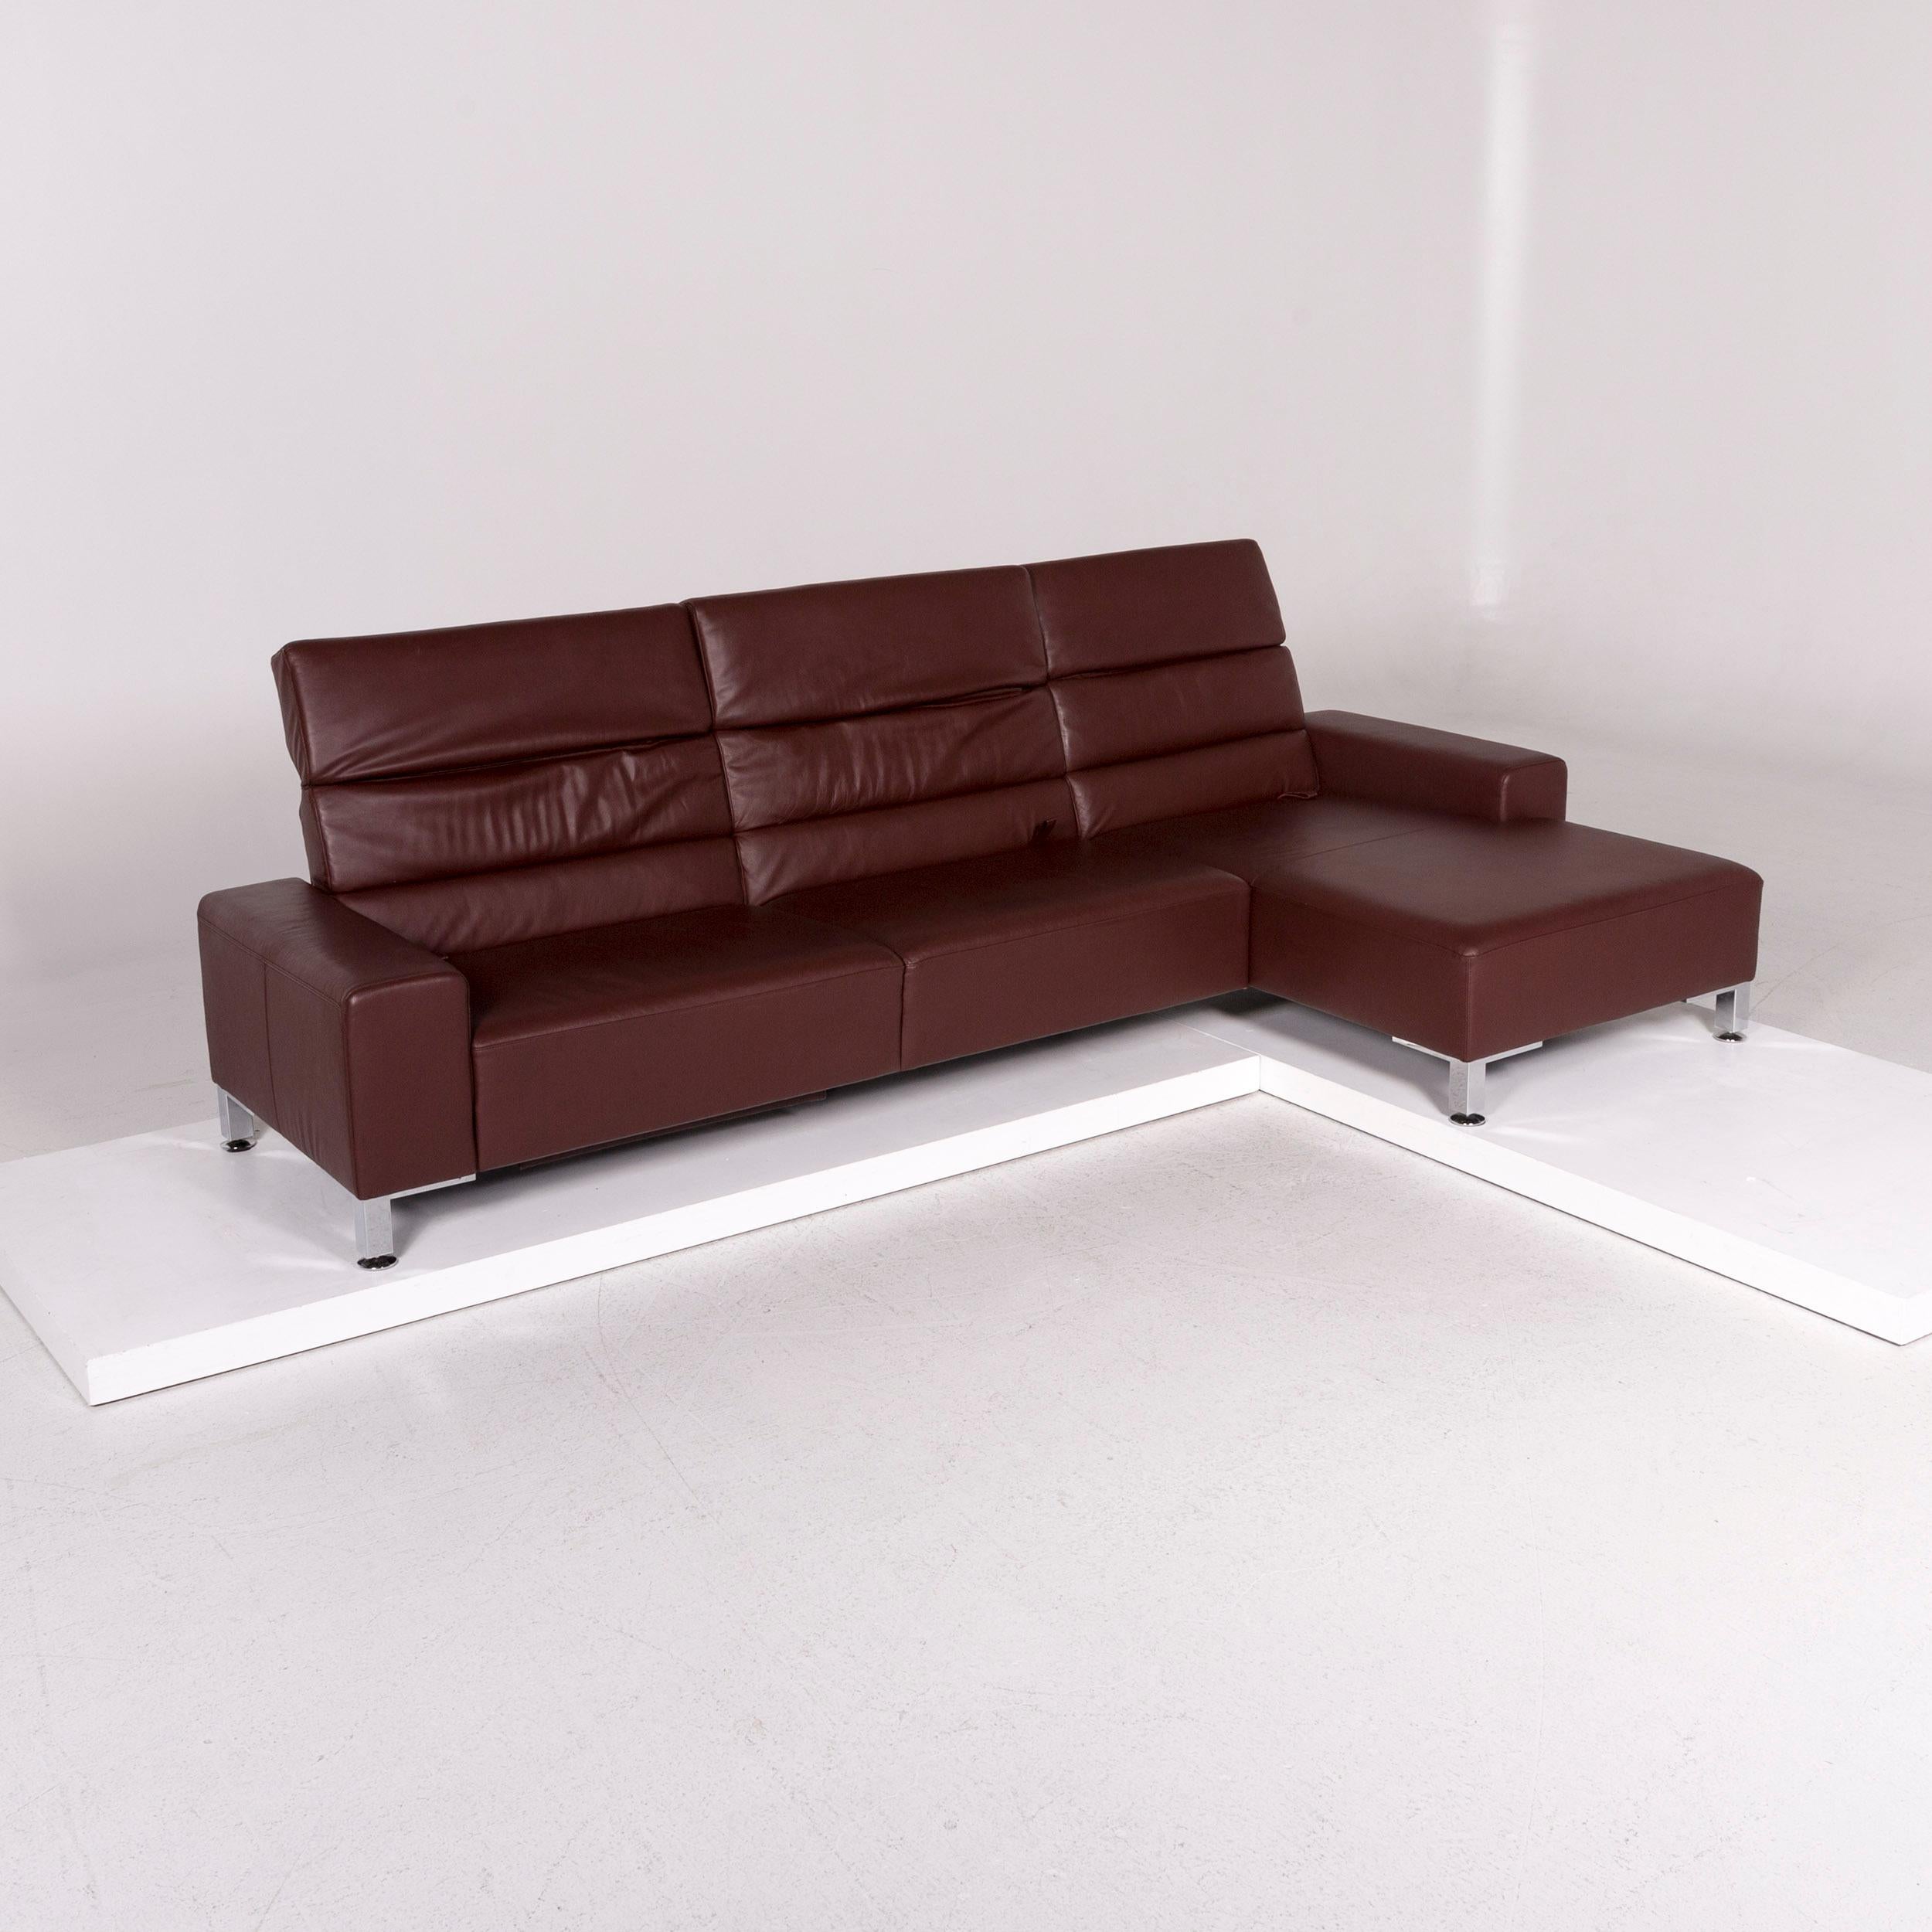 We bring to you a Brühl & Sippold leather corner sofa Bordeaux dark red auburn sofa function couch.

 

 Product measurements in centimeters:
 

Depth 92
Width 300
Height 114
Seat-height 41
Rest-height 53
Seat-depth 60
Seat-width